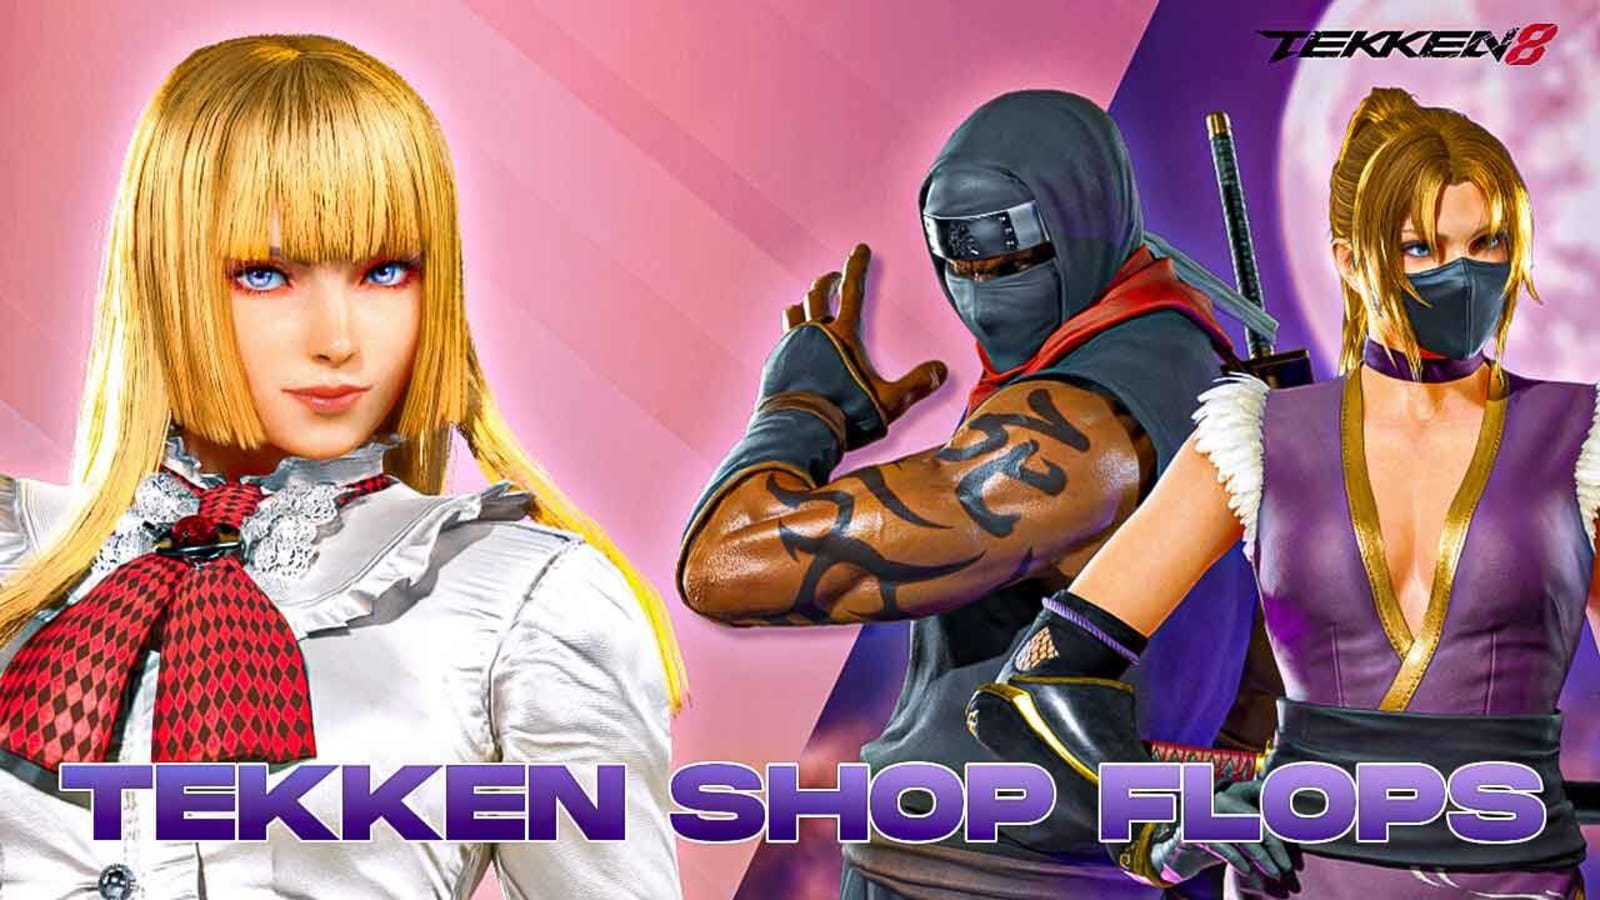 Fans Accuse Bandai for being Lazy with Tekken 8 Shop Items